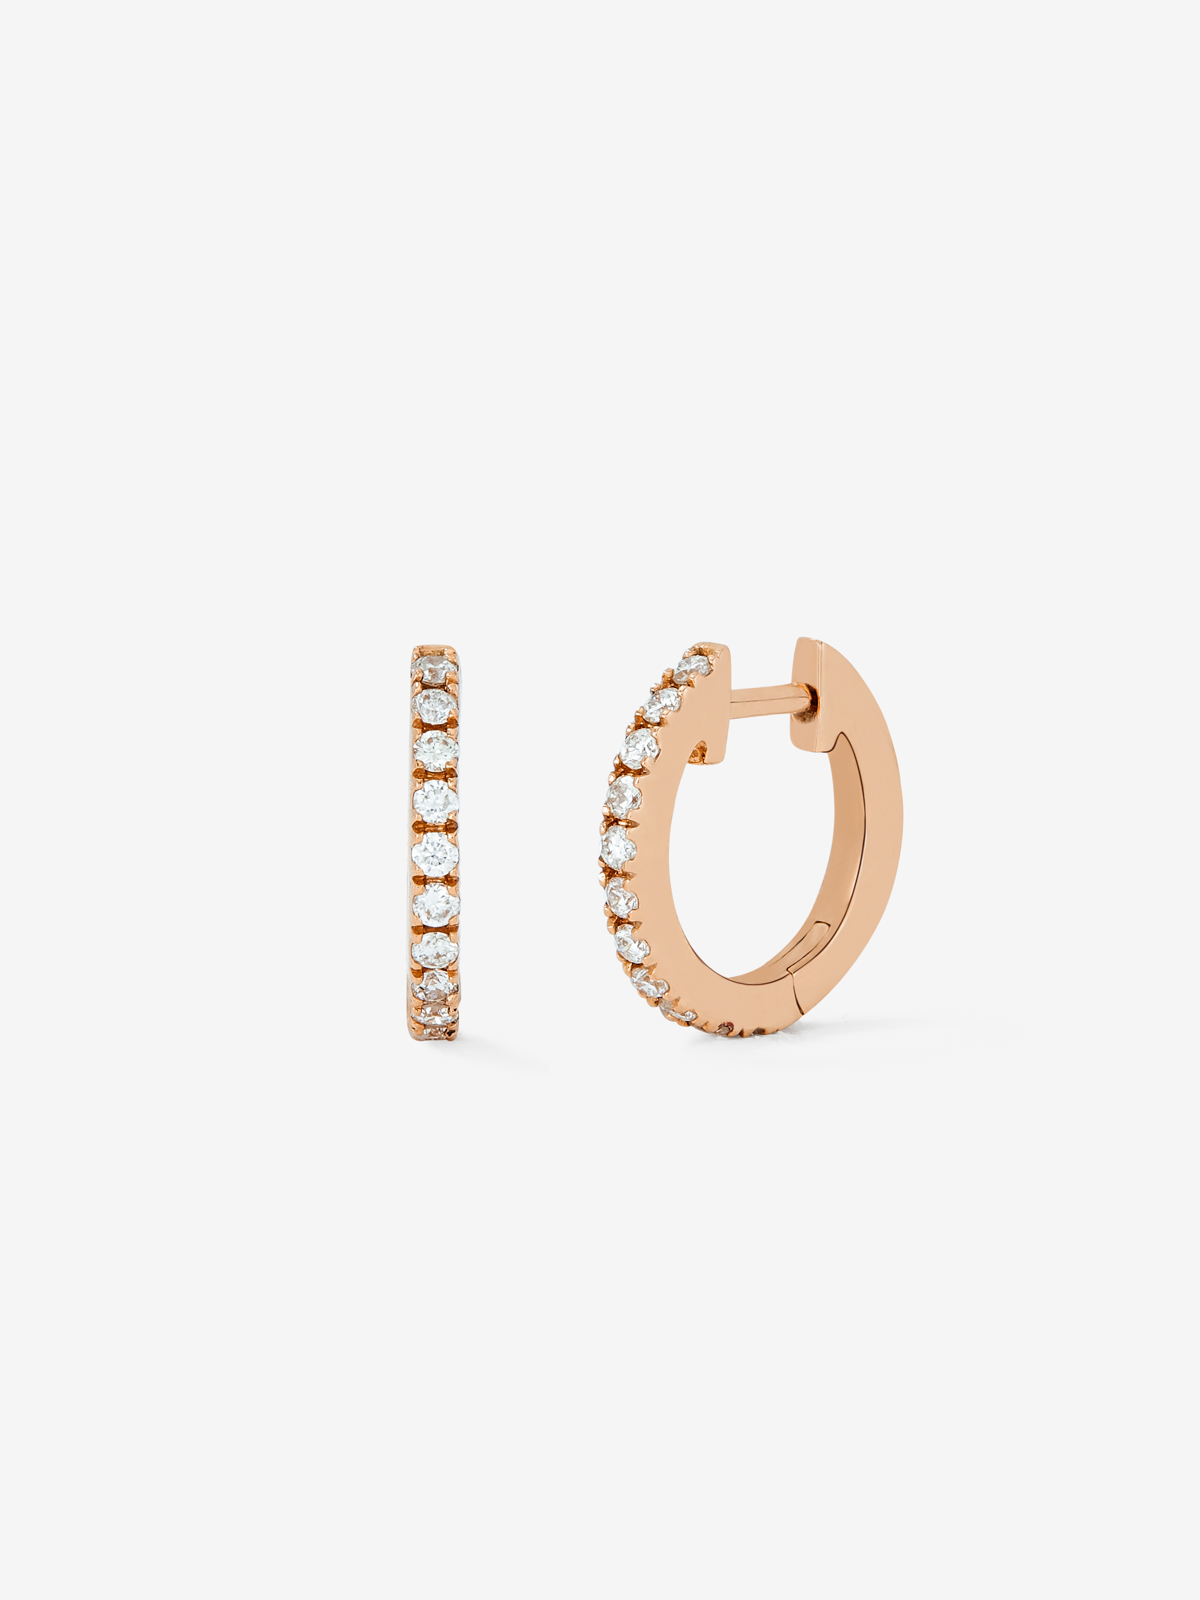 18K rose gold small hoop earrings with diamonds